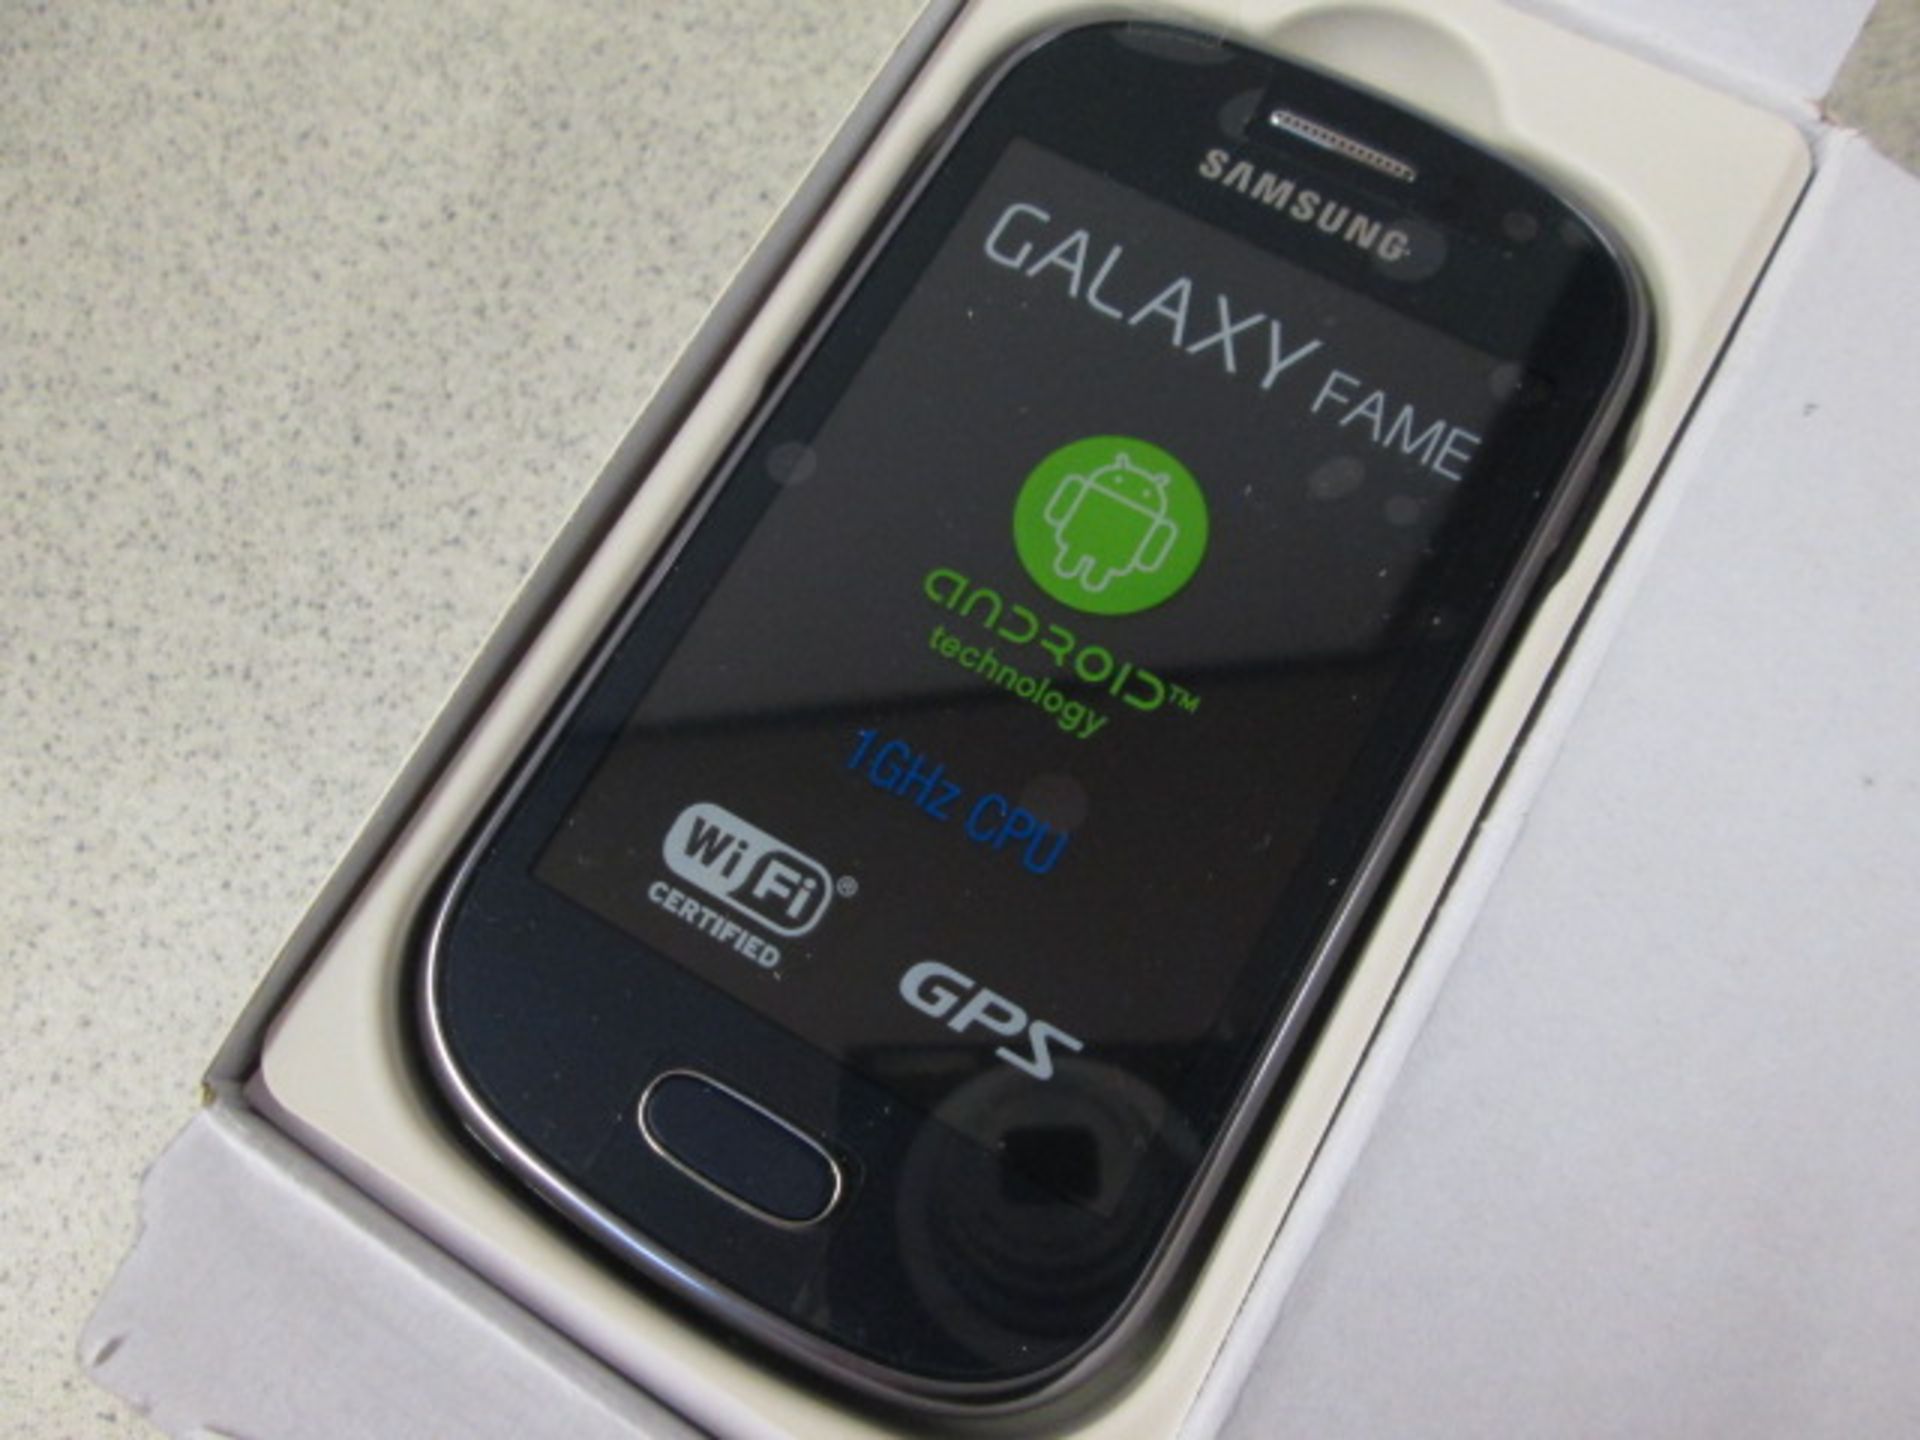 10 x Samsung Galaxy Fame, Model GT-S6810P, Mobile Phones. - Image 4 of 6